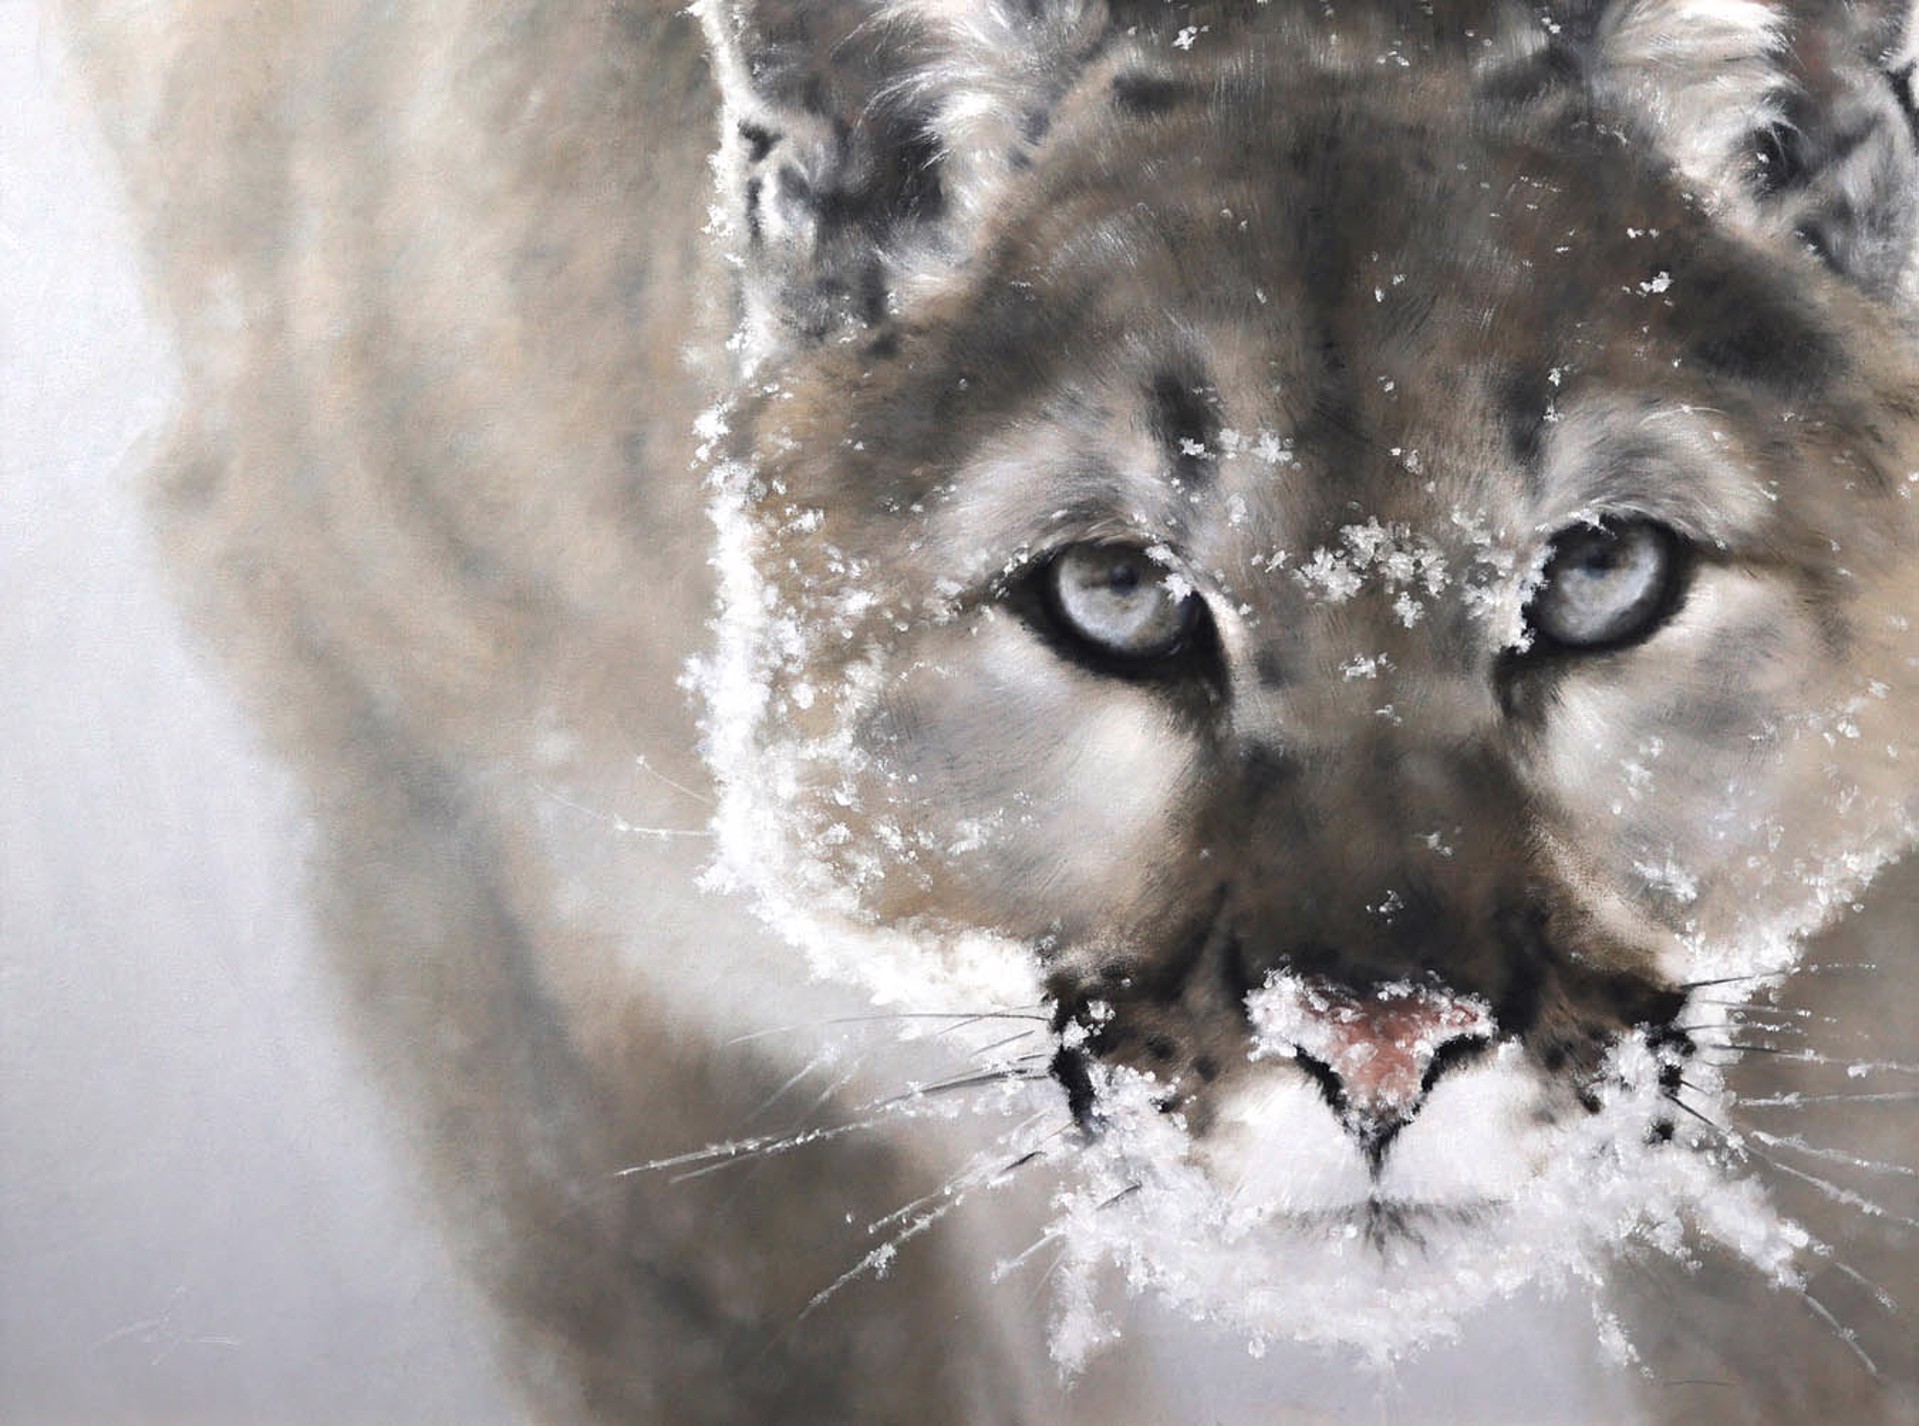 Original Oil Painting By Doyle Hostetler Featuring A Close Up View Of A Mountain Lion In A Muted Color Scheme